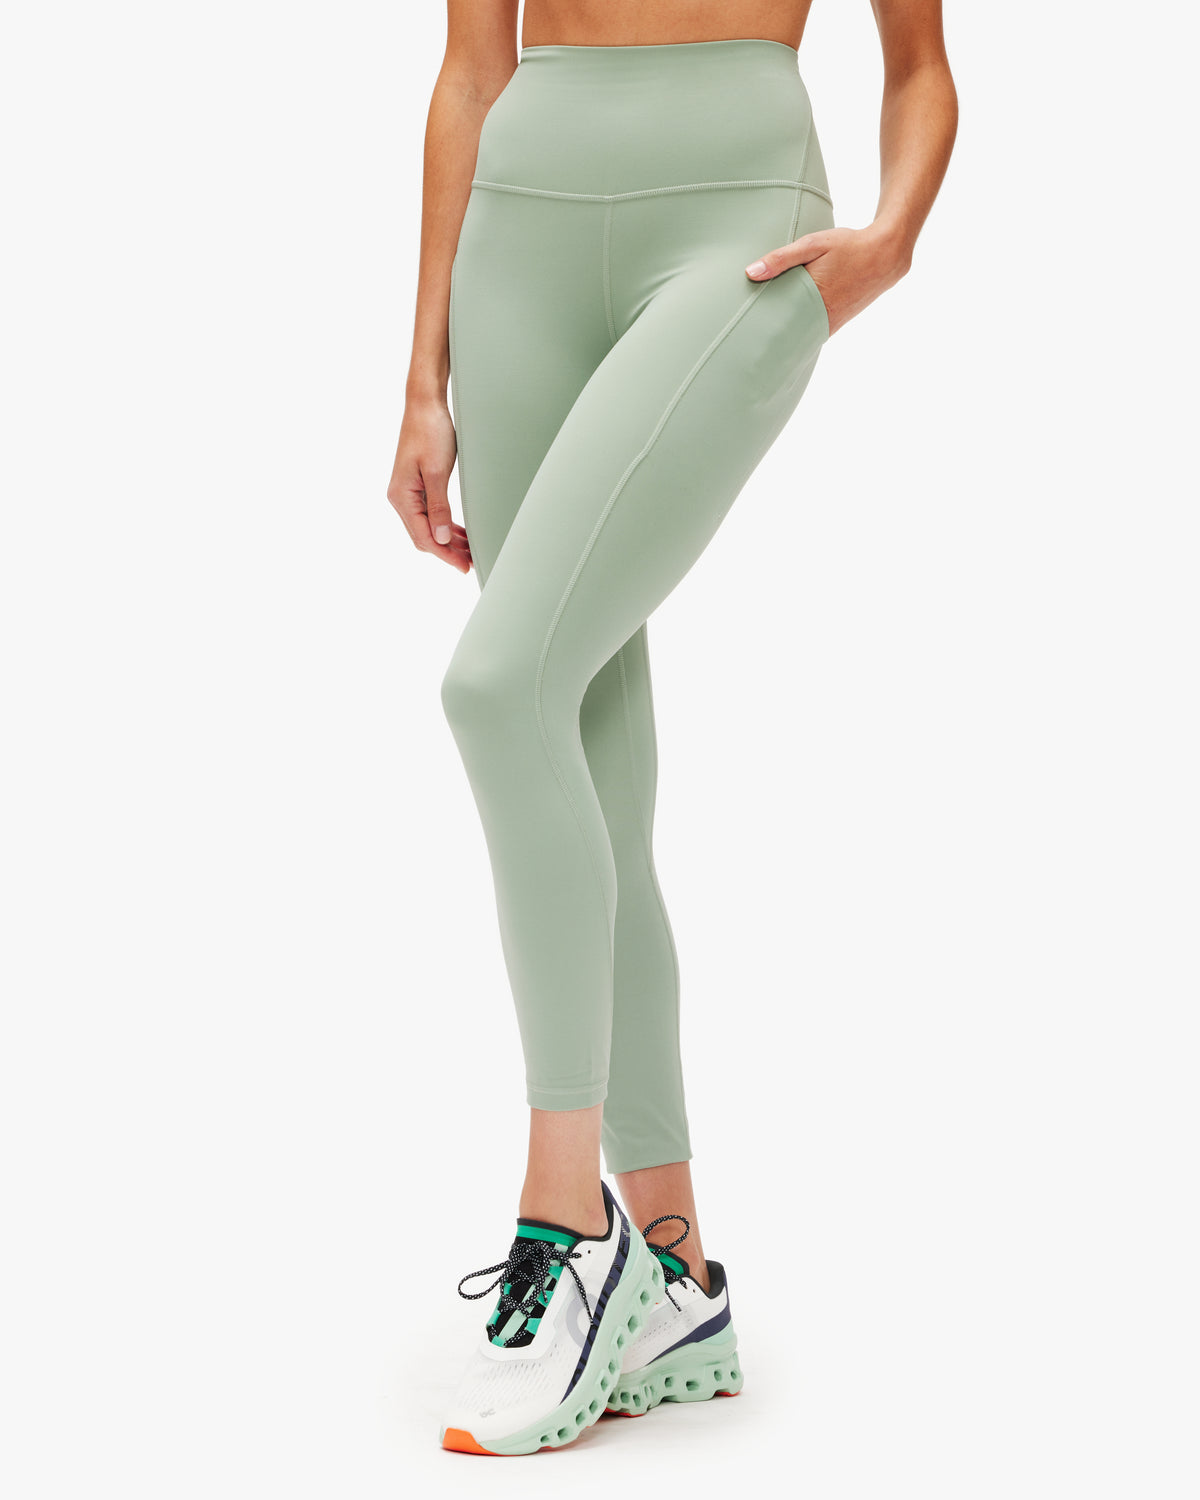 Lululemon Align High-Rise Pant 25 With Pockets